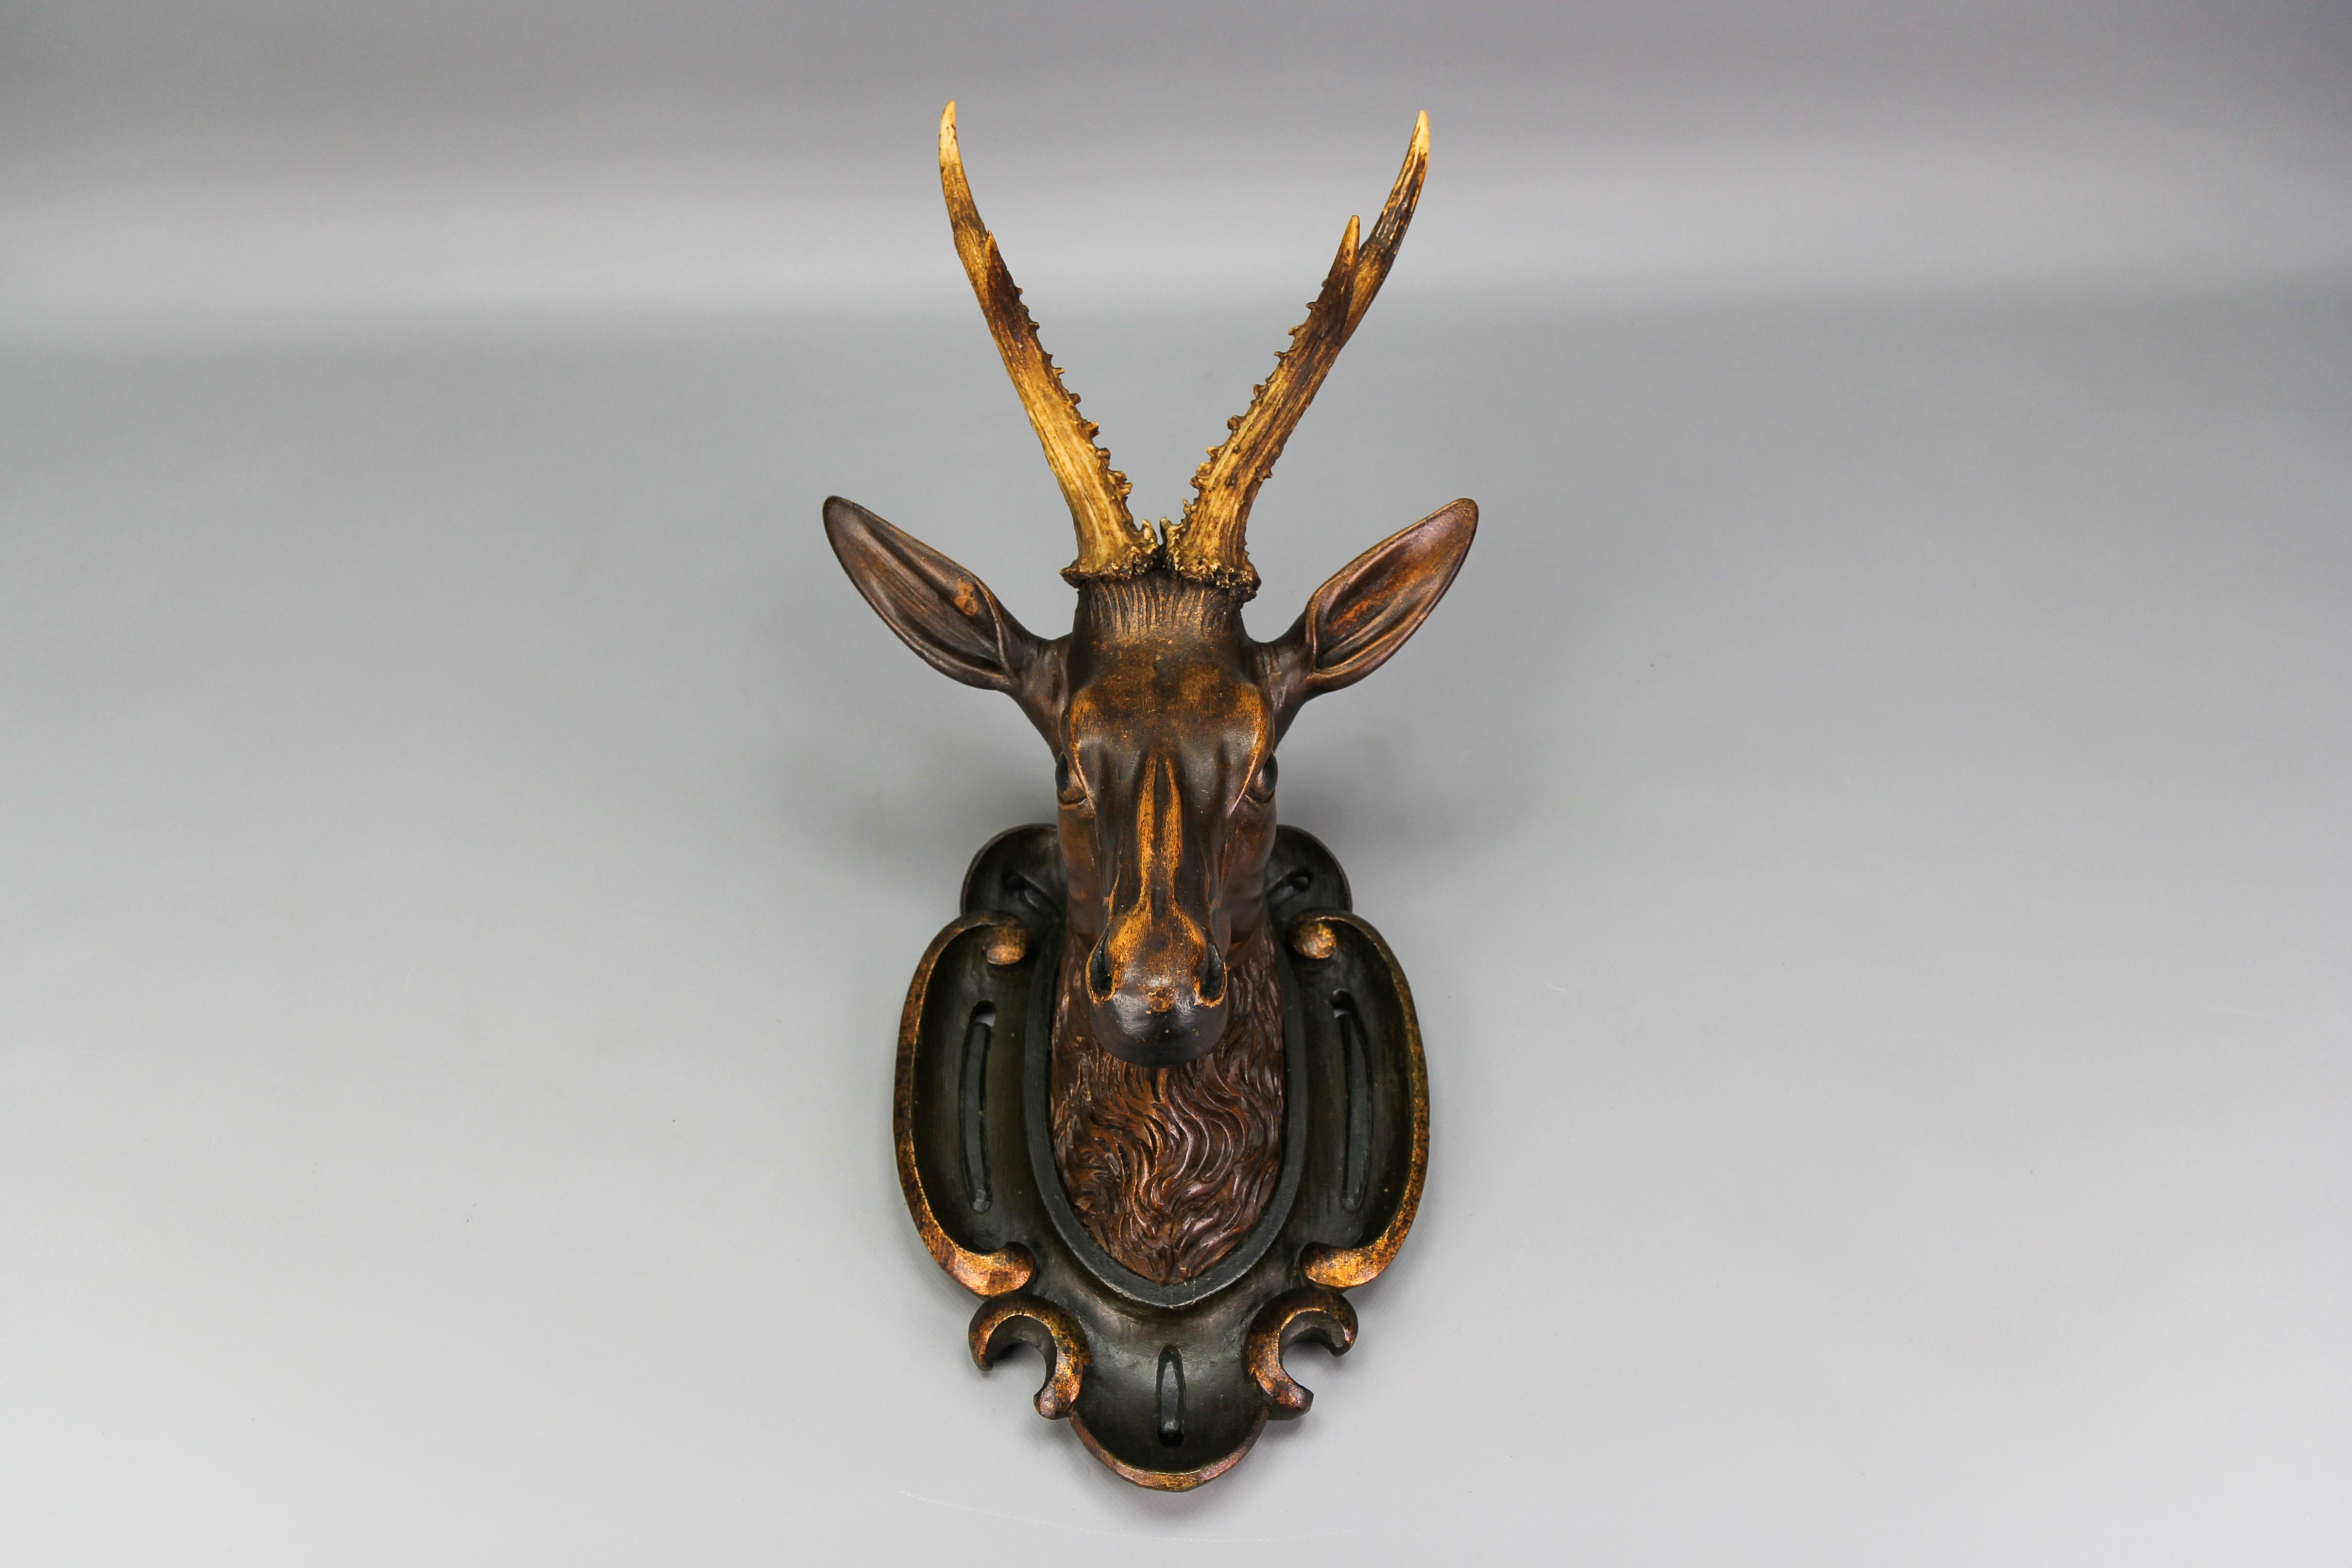 19th-century Baroque-style German hand-carved wooden deer head on a carved and hand-painted wall plaque.
An impressive antique hand-carved wall-hanging deer head made of linden wood with genuine antlers mounted on a carved oval ornate wooden plaque